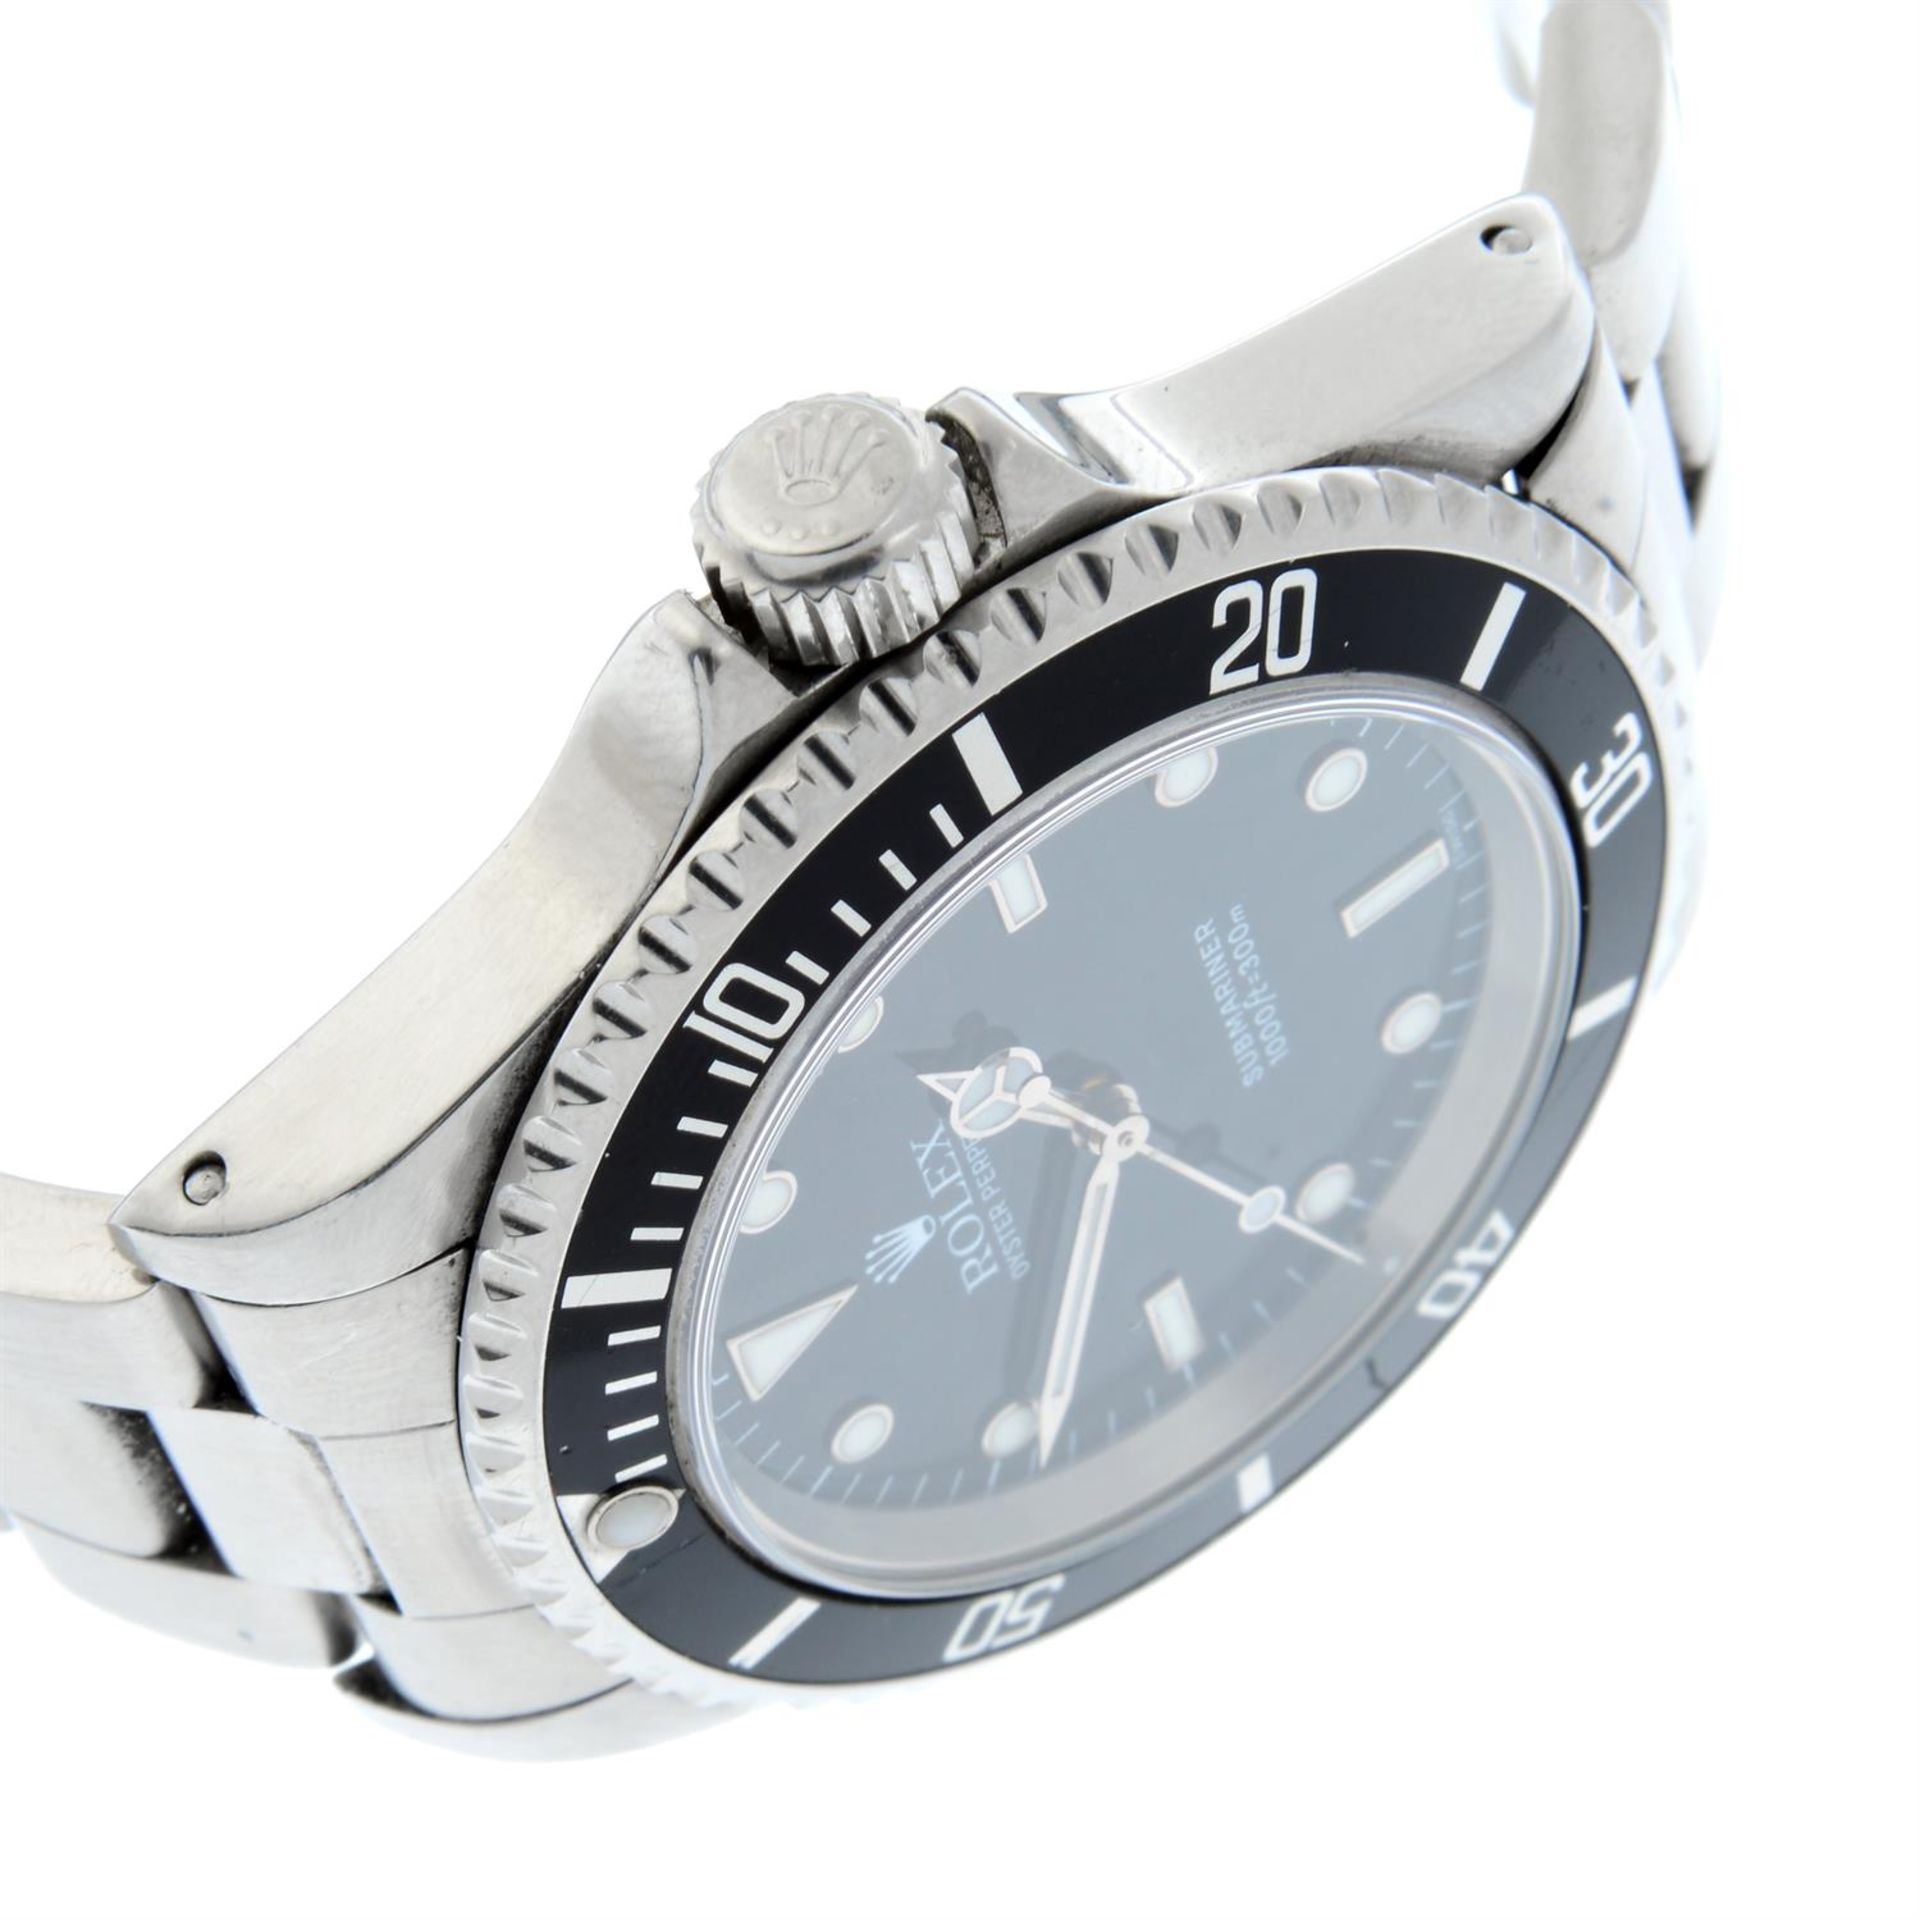 ROLEX - a stainless steel Oyster Perpetual Submariner bracelet watch, 39mm. - Image 3 of 6